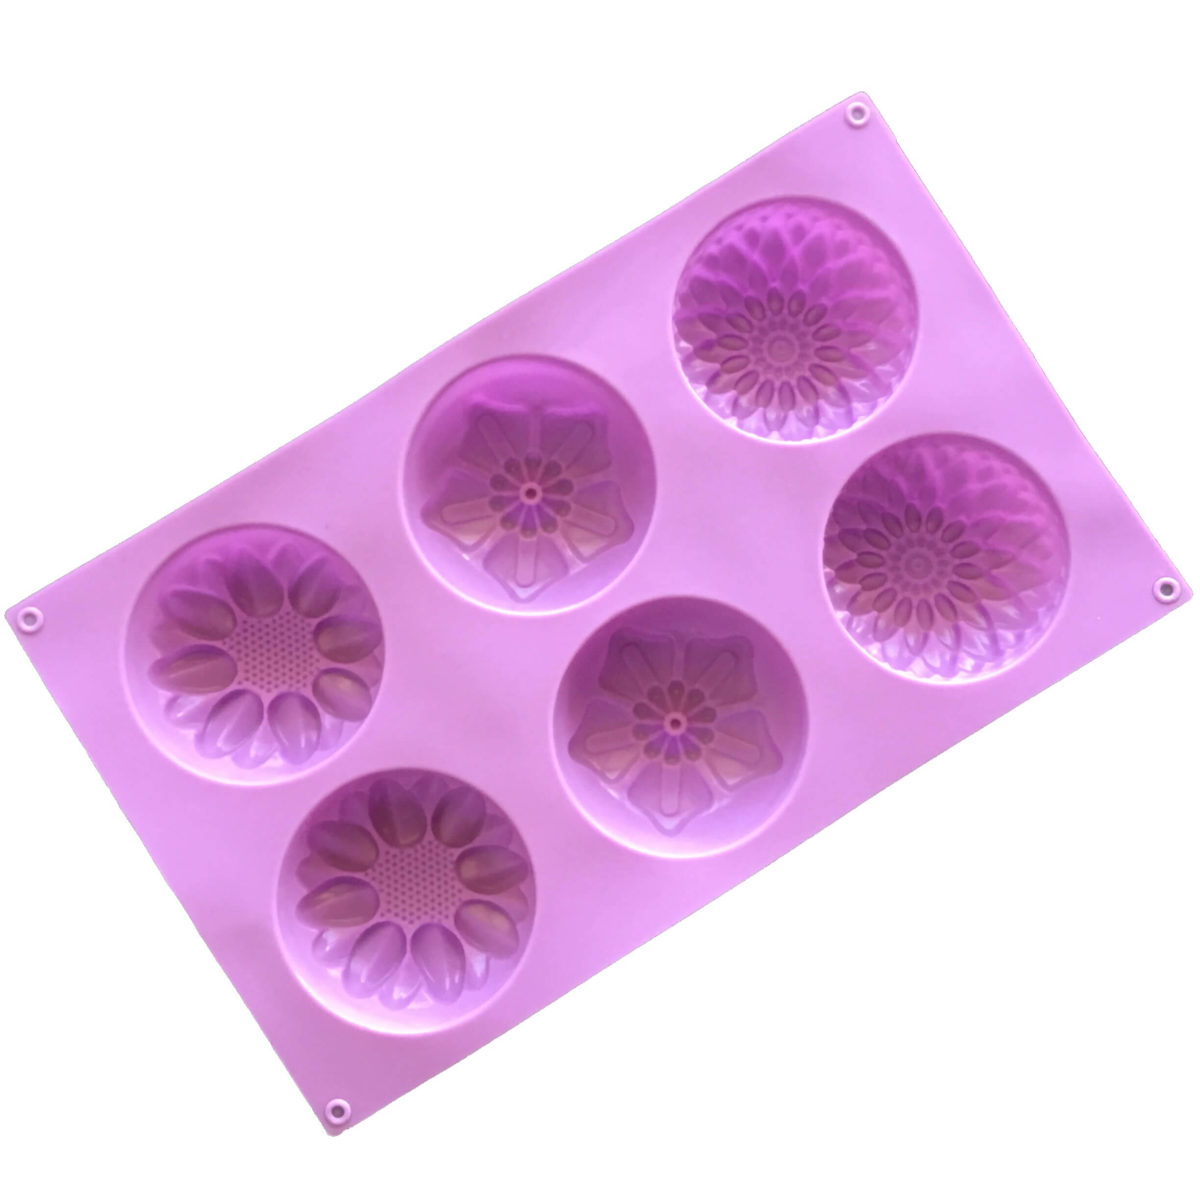 back of large purple silicone mould with six cavites - two each of dahlia, poinsettia and calendula flowers